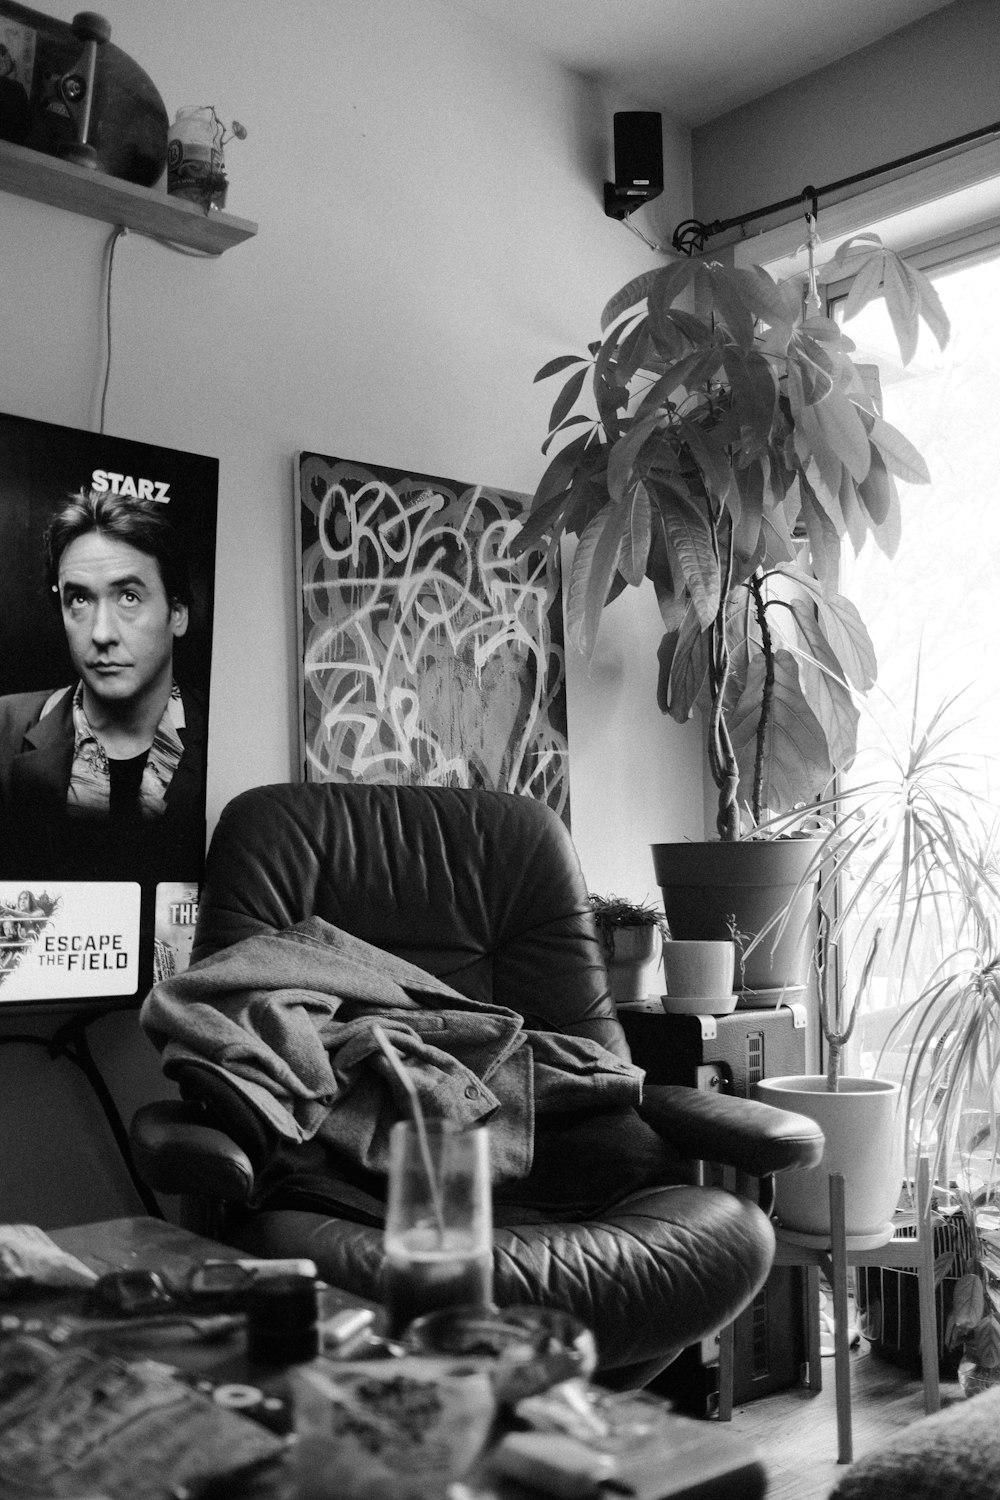 a black and white photo of a living room